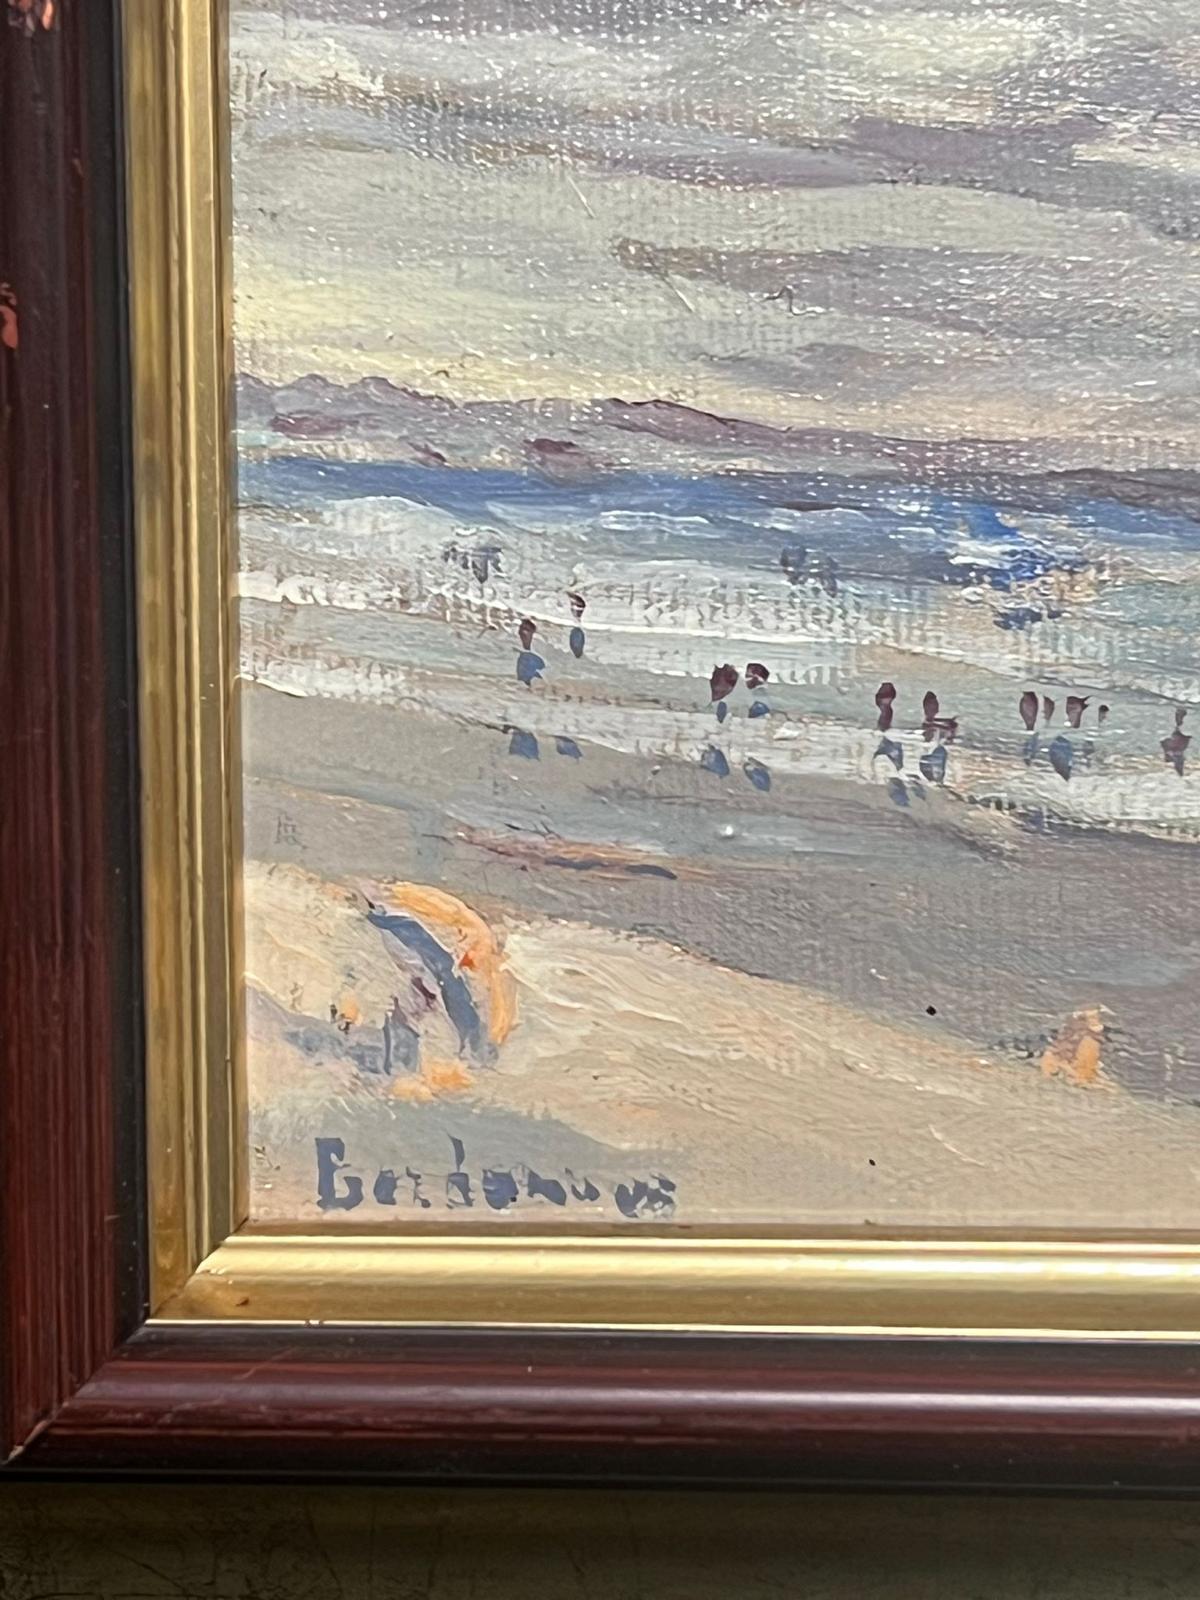 The Beach
by Georges Bordonave (French contemporary)  
signed oil painting on board, framed
dated 
framed: 13 x 15 inches
condition: very good
provenance: from a large private collection of this artists work, western Paris, France. 